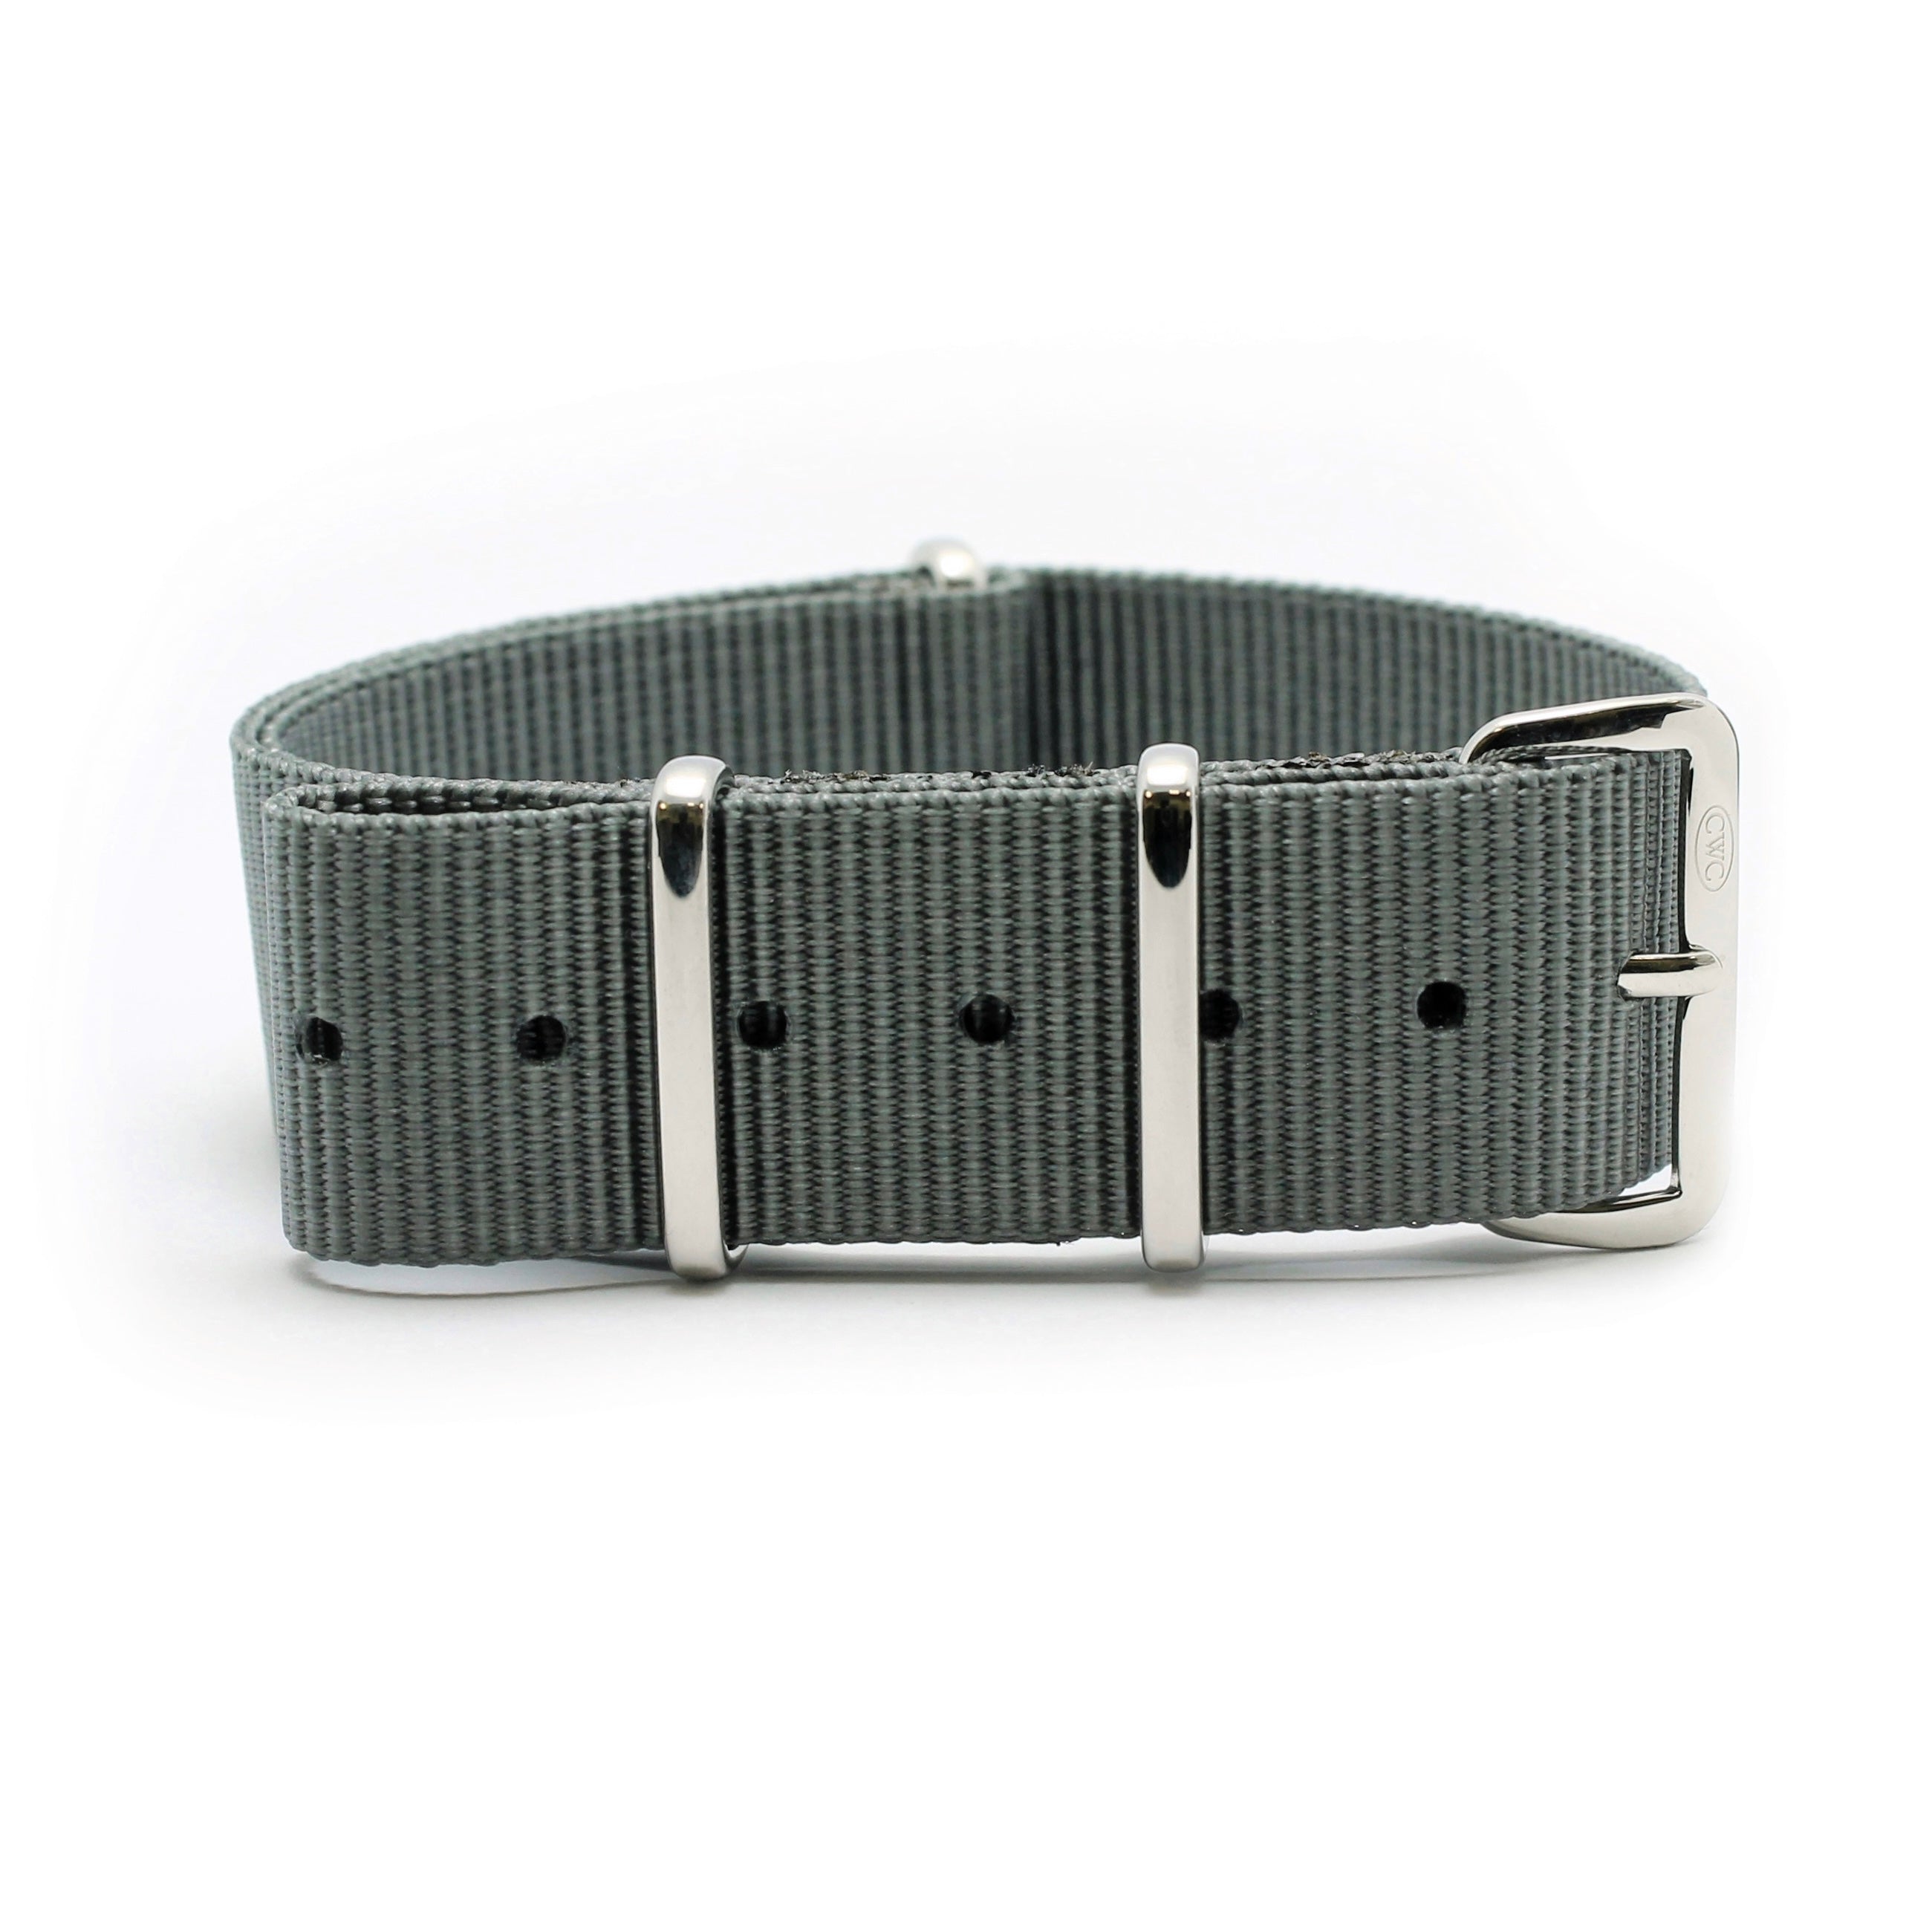 CWC DIVERS LONG WATCH STRAP - NATO GREY